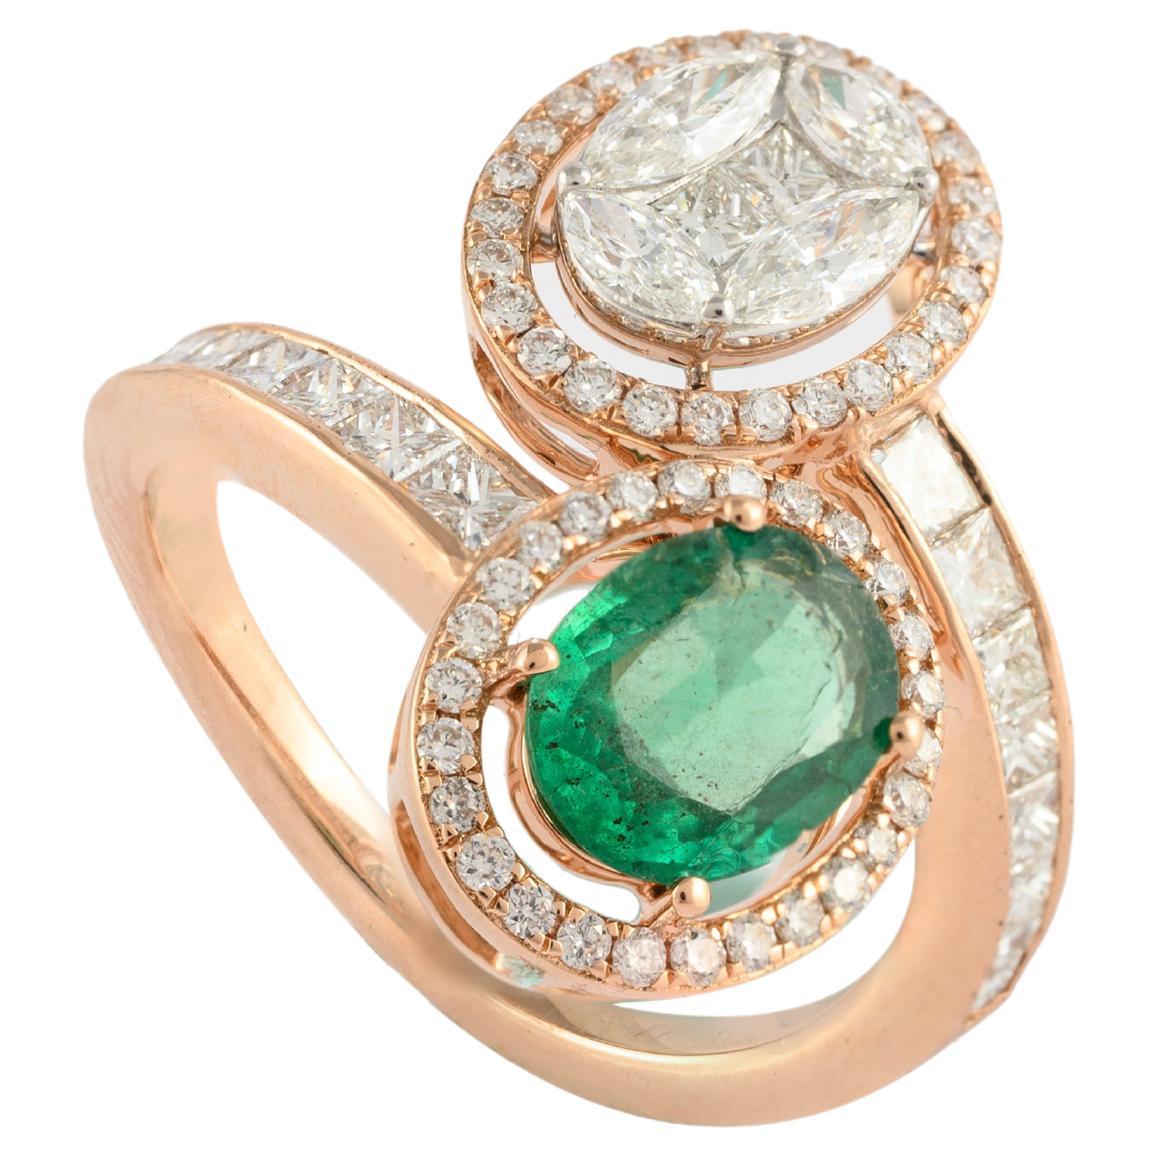 For Sale:  Modern Toi Et Moi Diamond and Emerald Ring in 18k Solid Yellow Gold